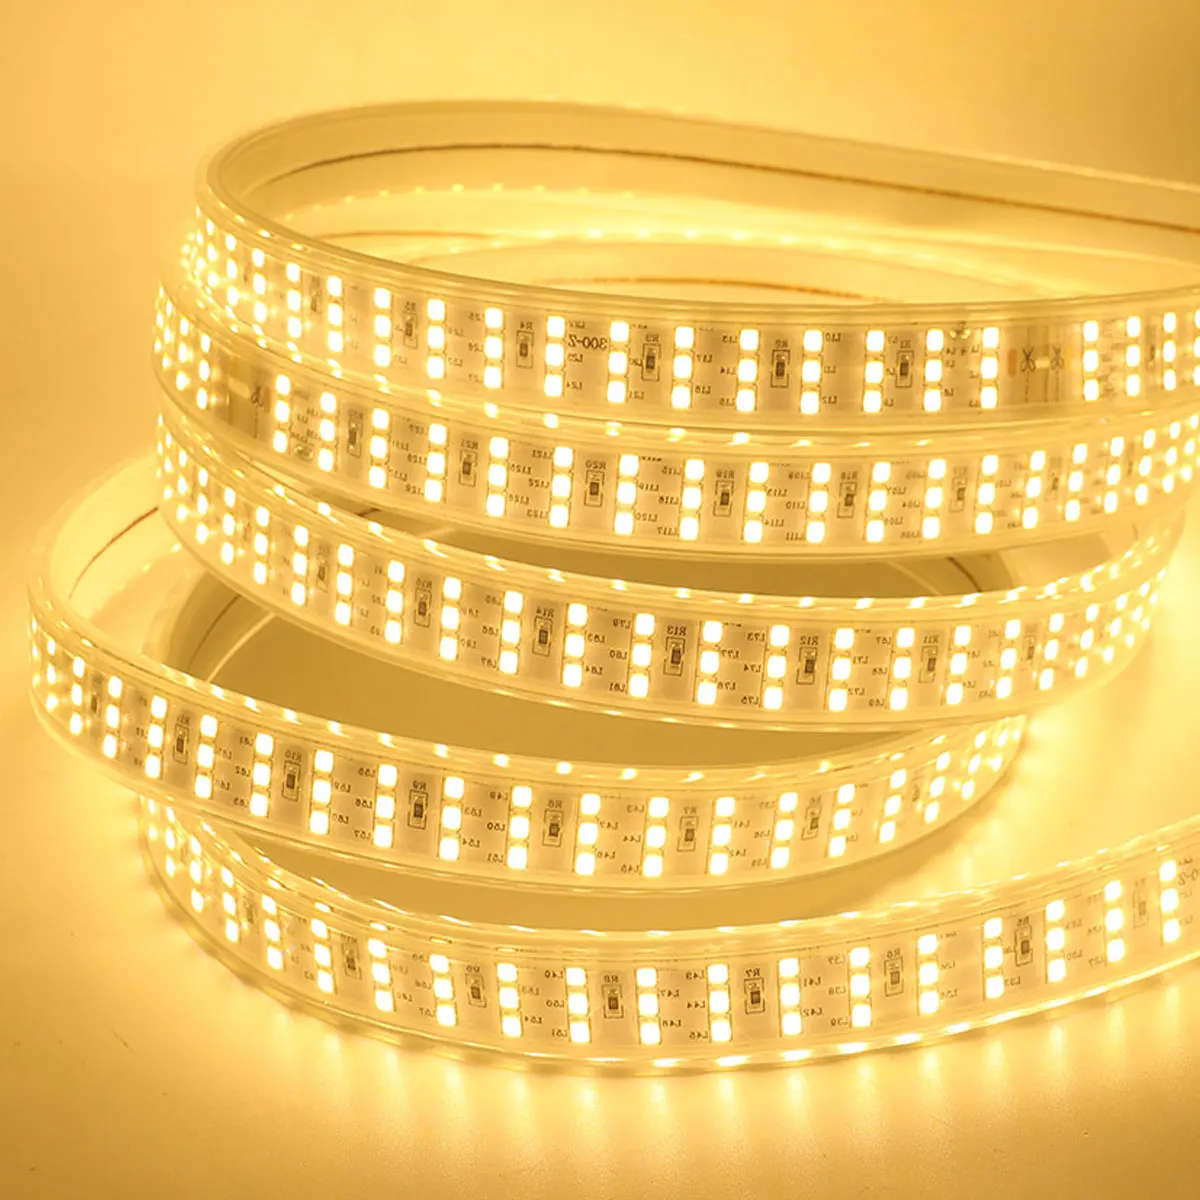 Flexible High Voltage AC110V-230V Waterpoof IP68 Dimmable Super Bright 4040 180LEDs/m LED Strip Lights for Home Garden Outdoor